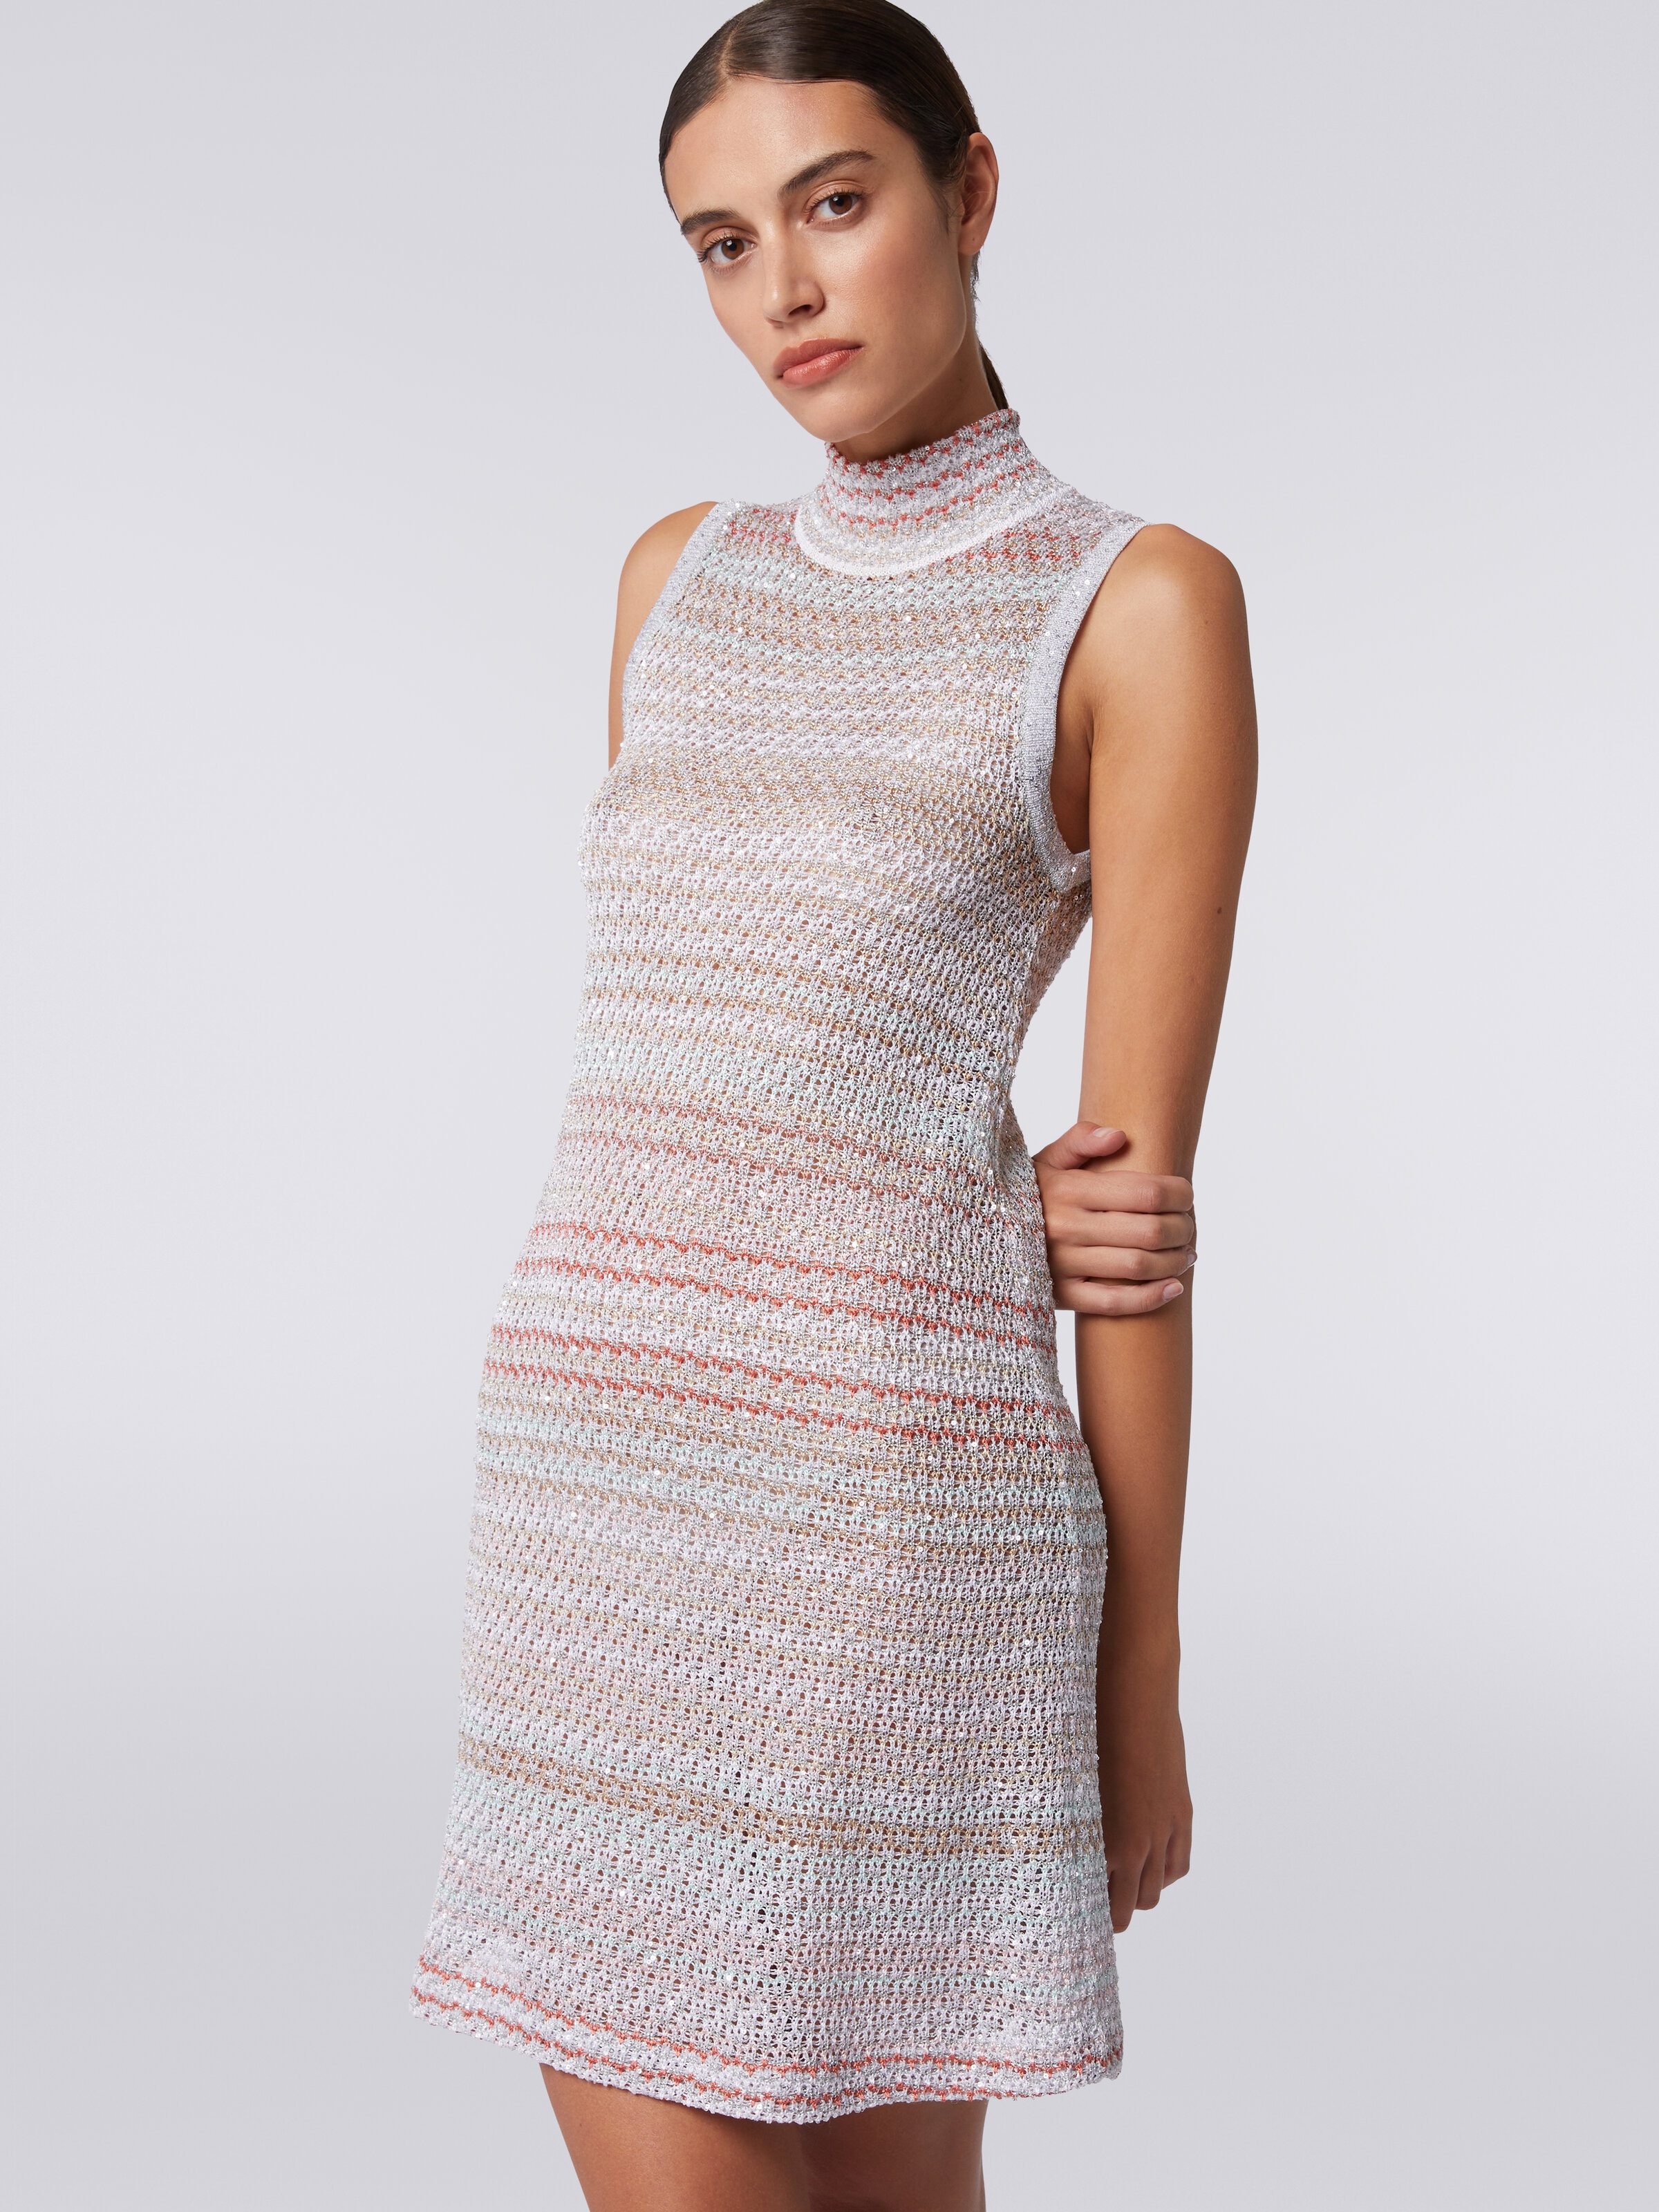 Minidress in mesh knit with high neck and sequin appliqué, Multicoloured  - 4